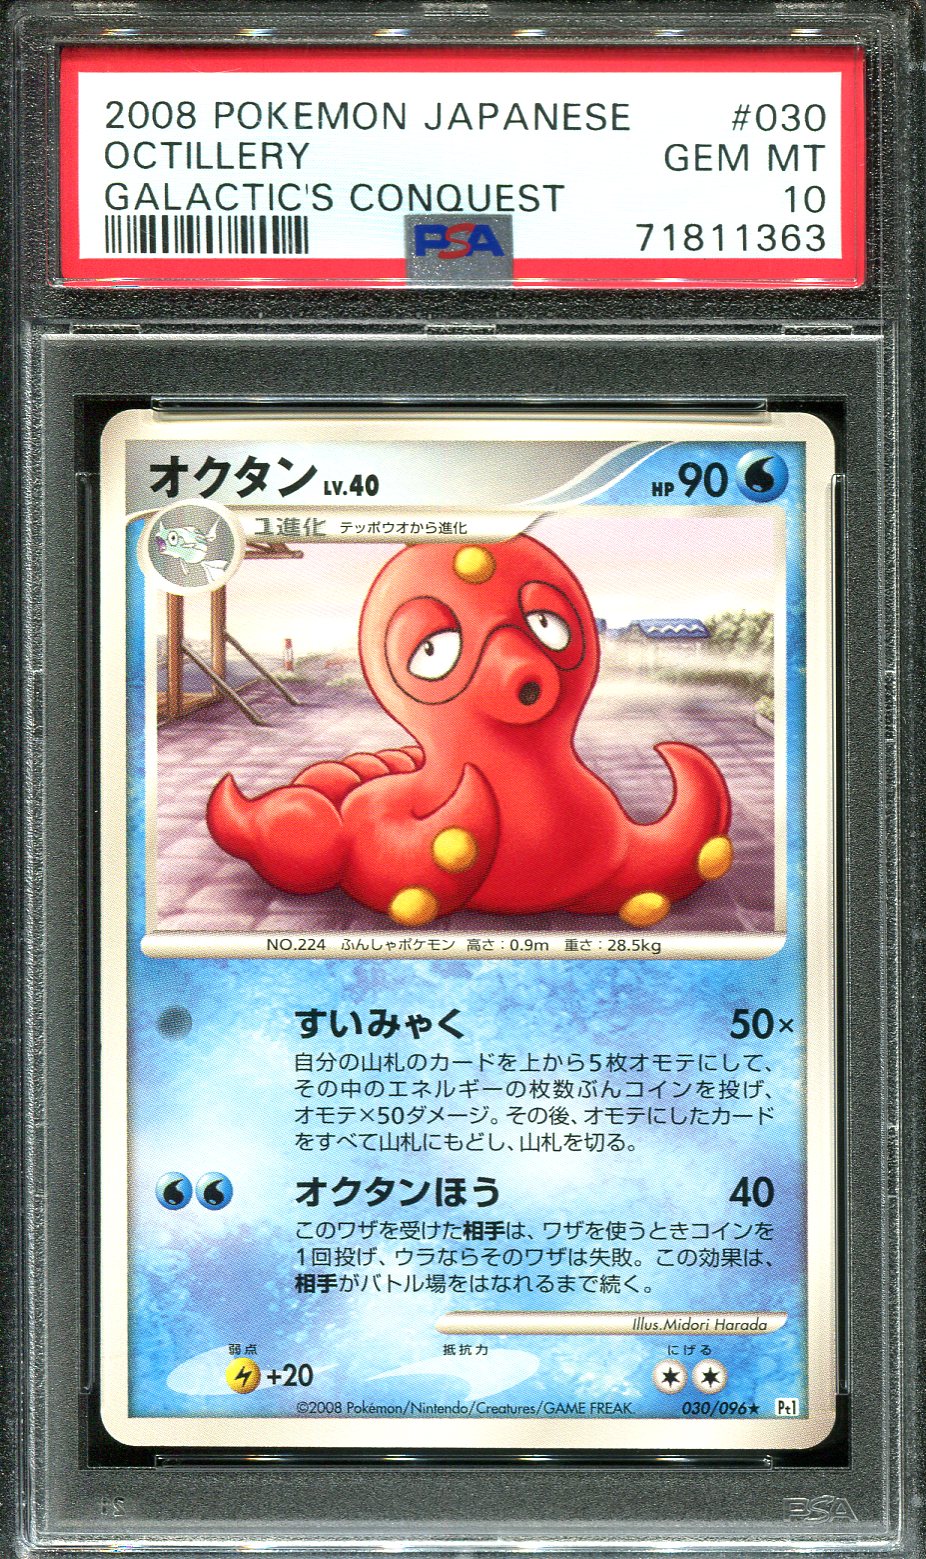 OCTILLERY 030/096 PSA 10 POKEMON GALACTIC'S CONQUEST JAPANESE